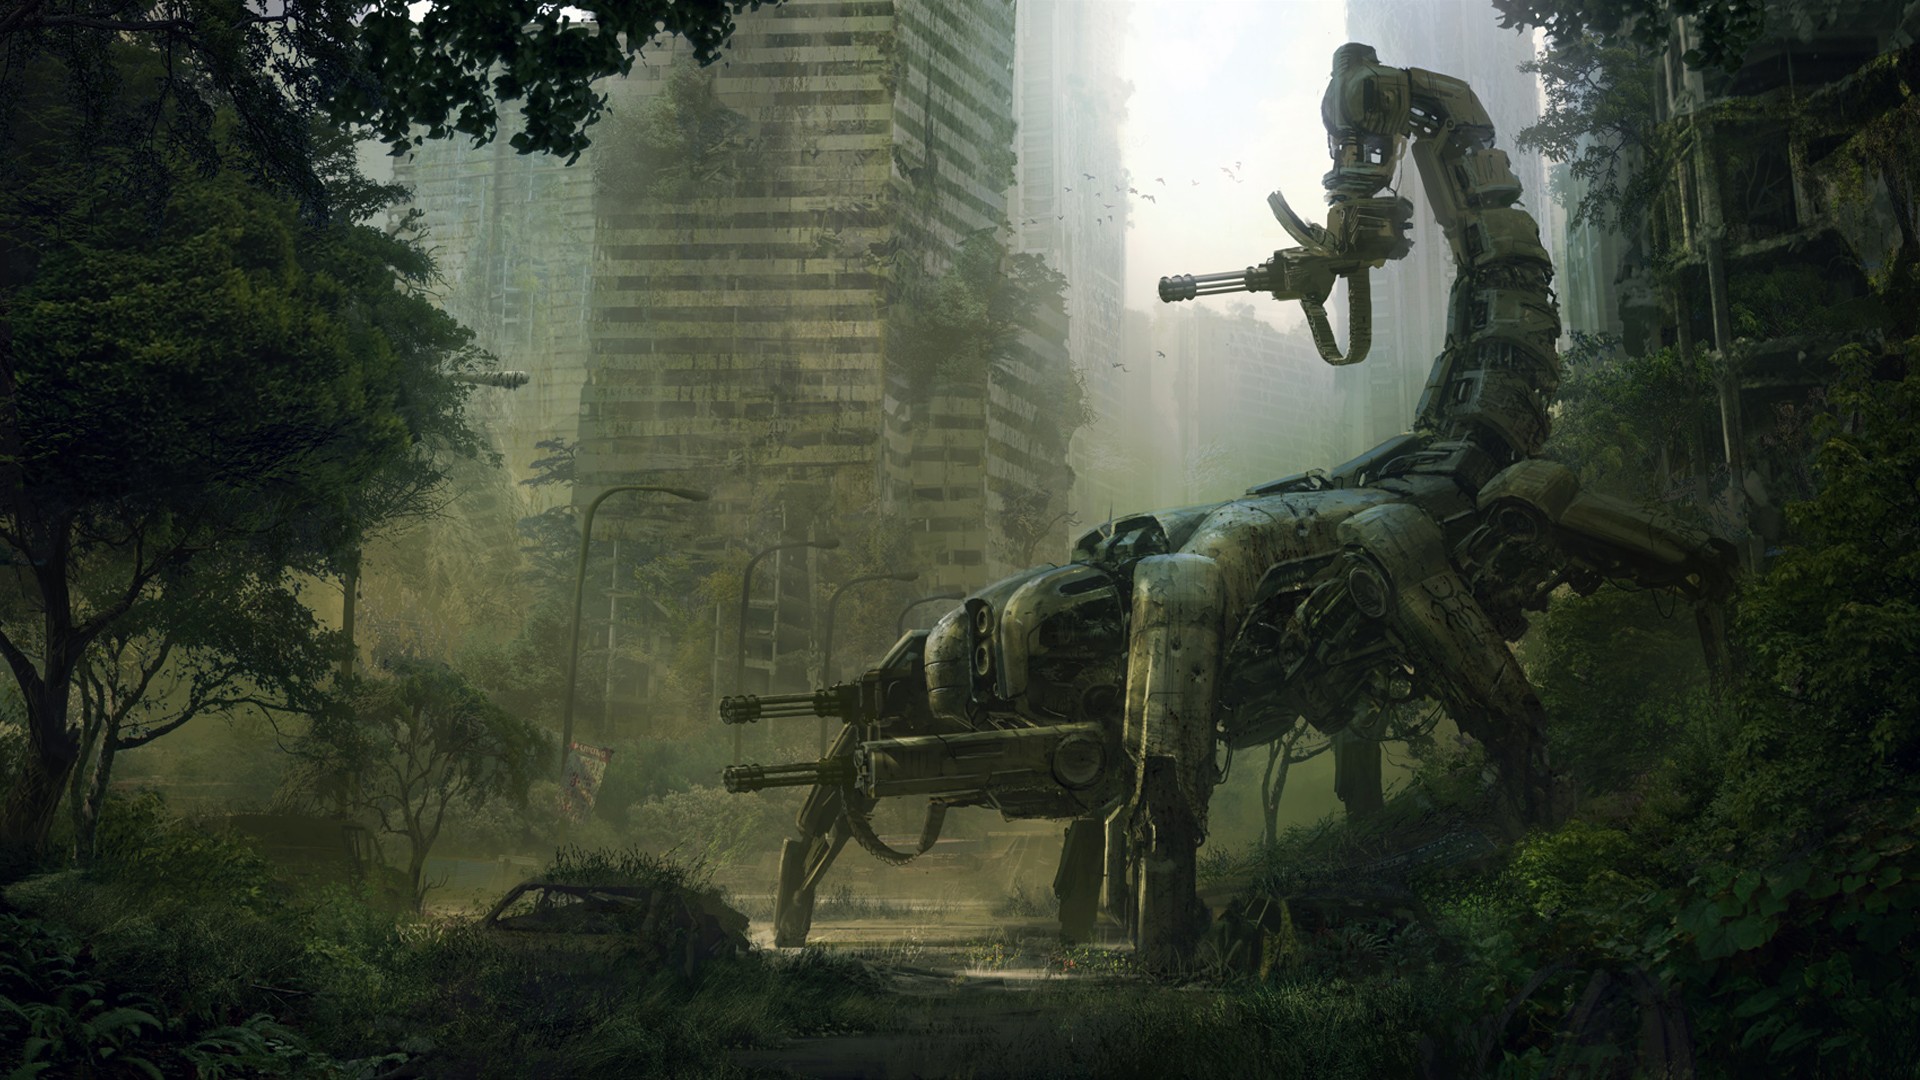 General 1920x1080 Wasteland 2 video games futuristic artwork science fiction ruins 2014 (Year) video game art PC gaming apocalyptic